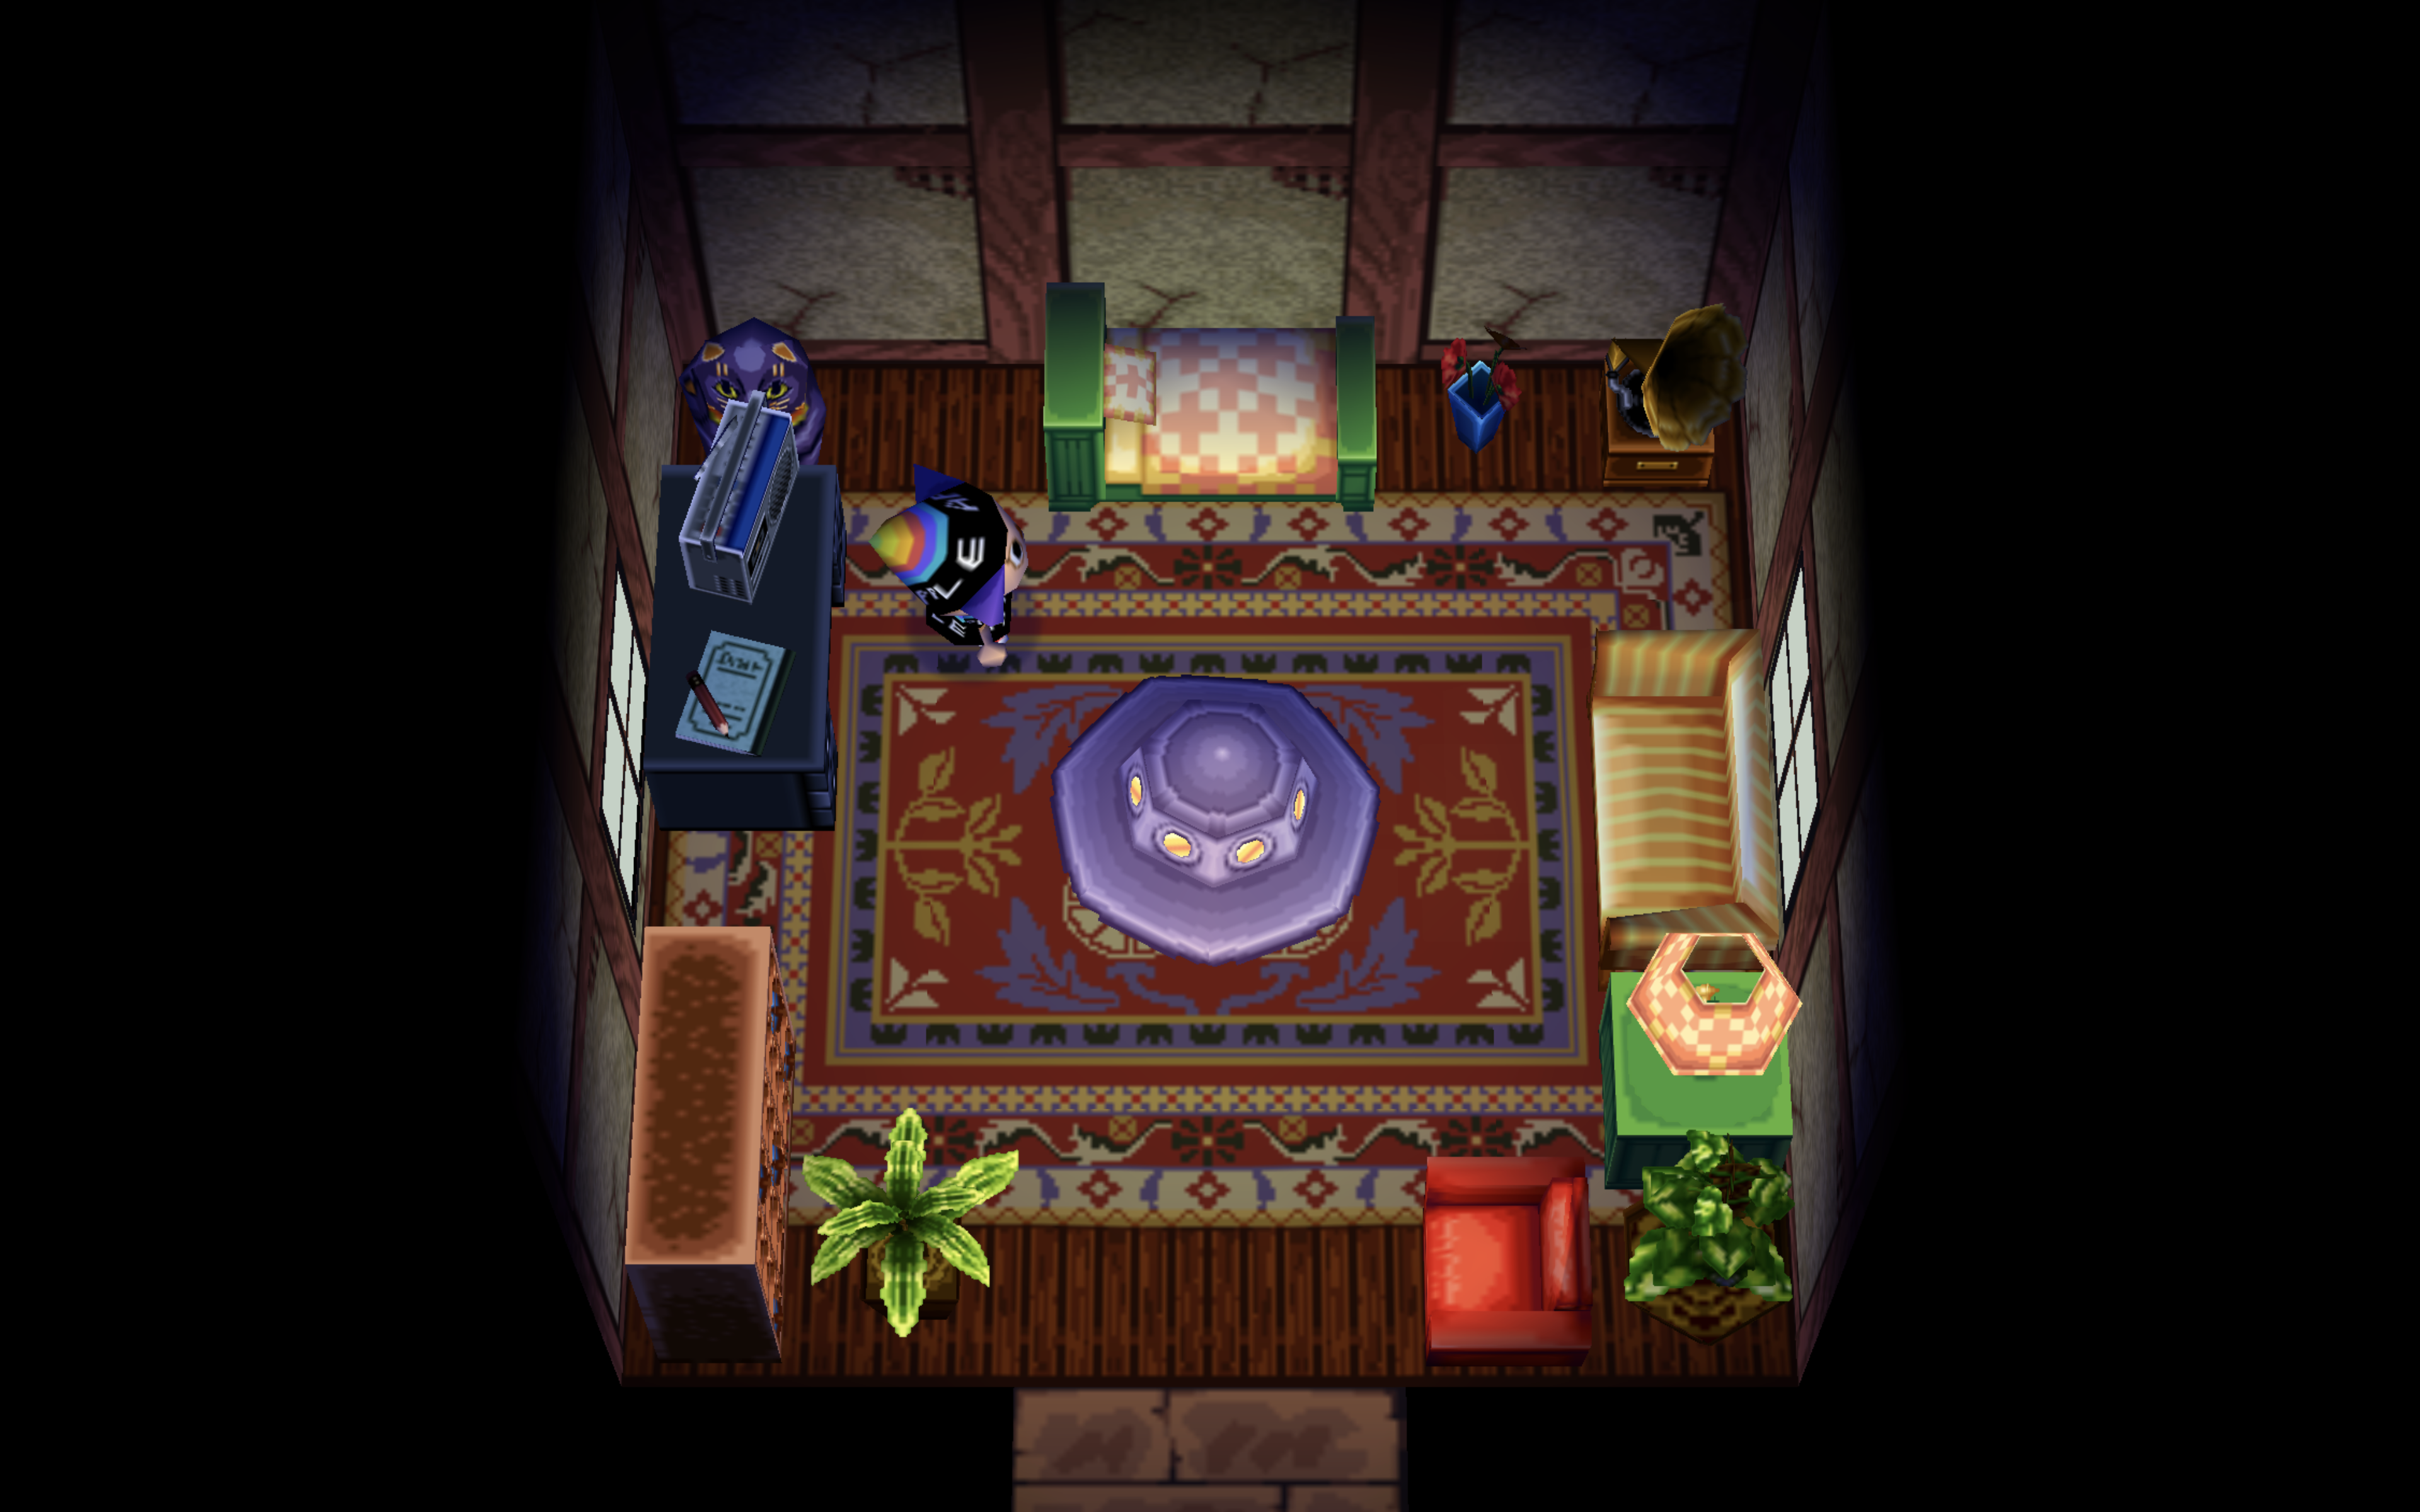 Interior of GENI's house in Animal Crossing